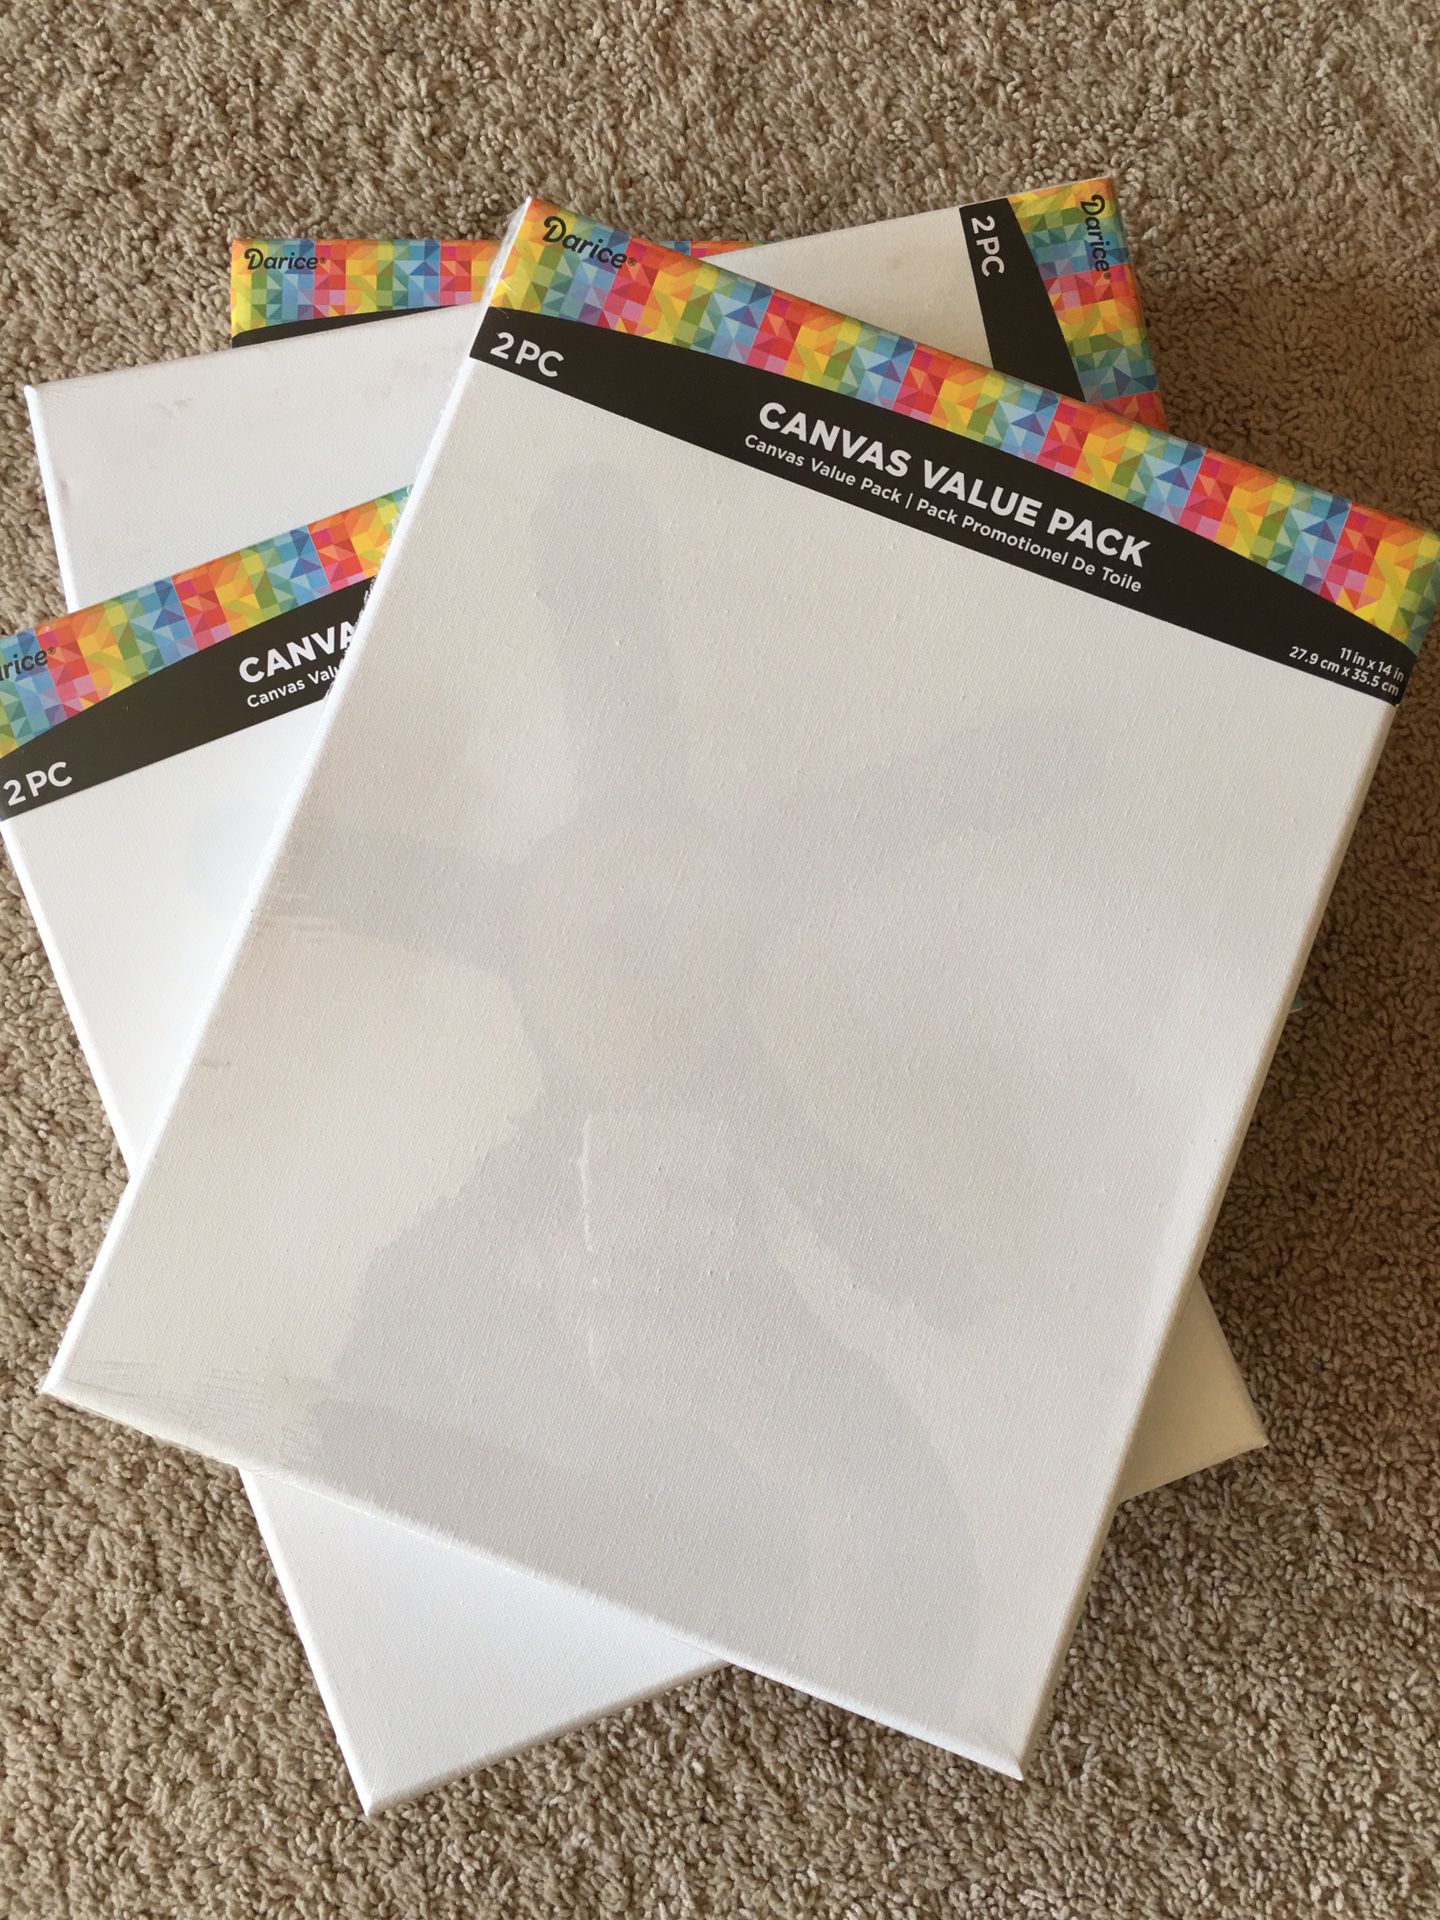 4-2pc Canvas Value Packs 11inX14in